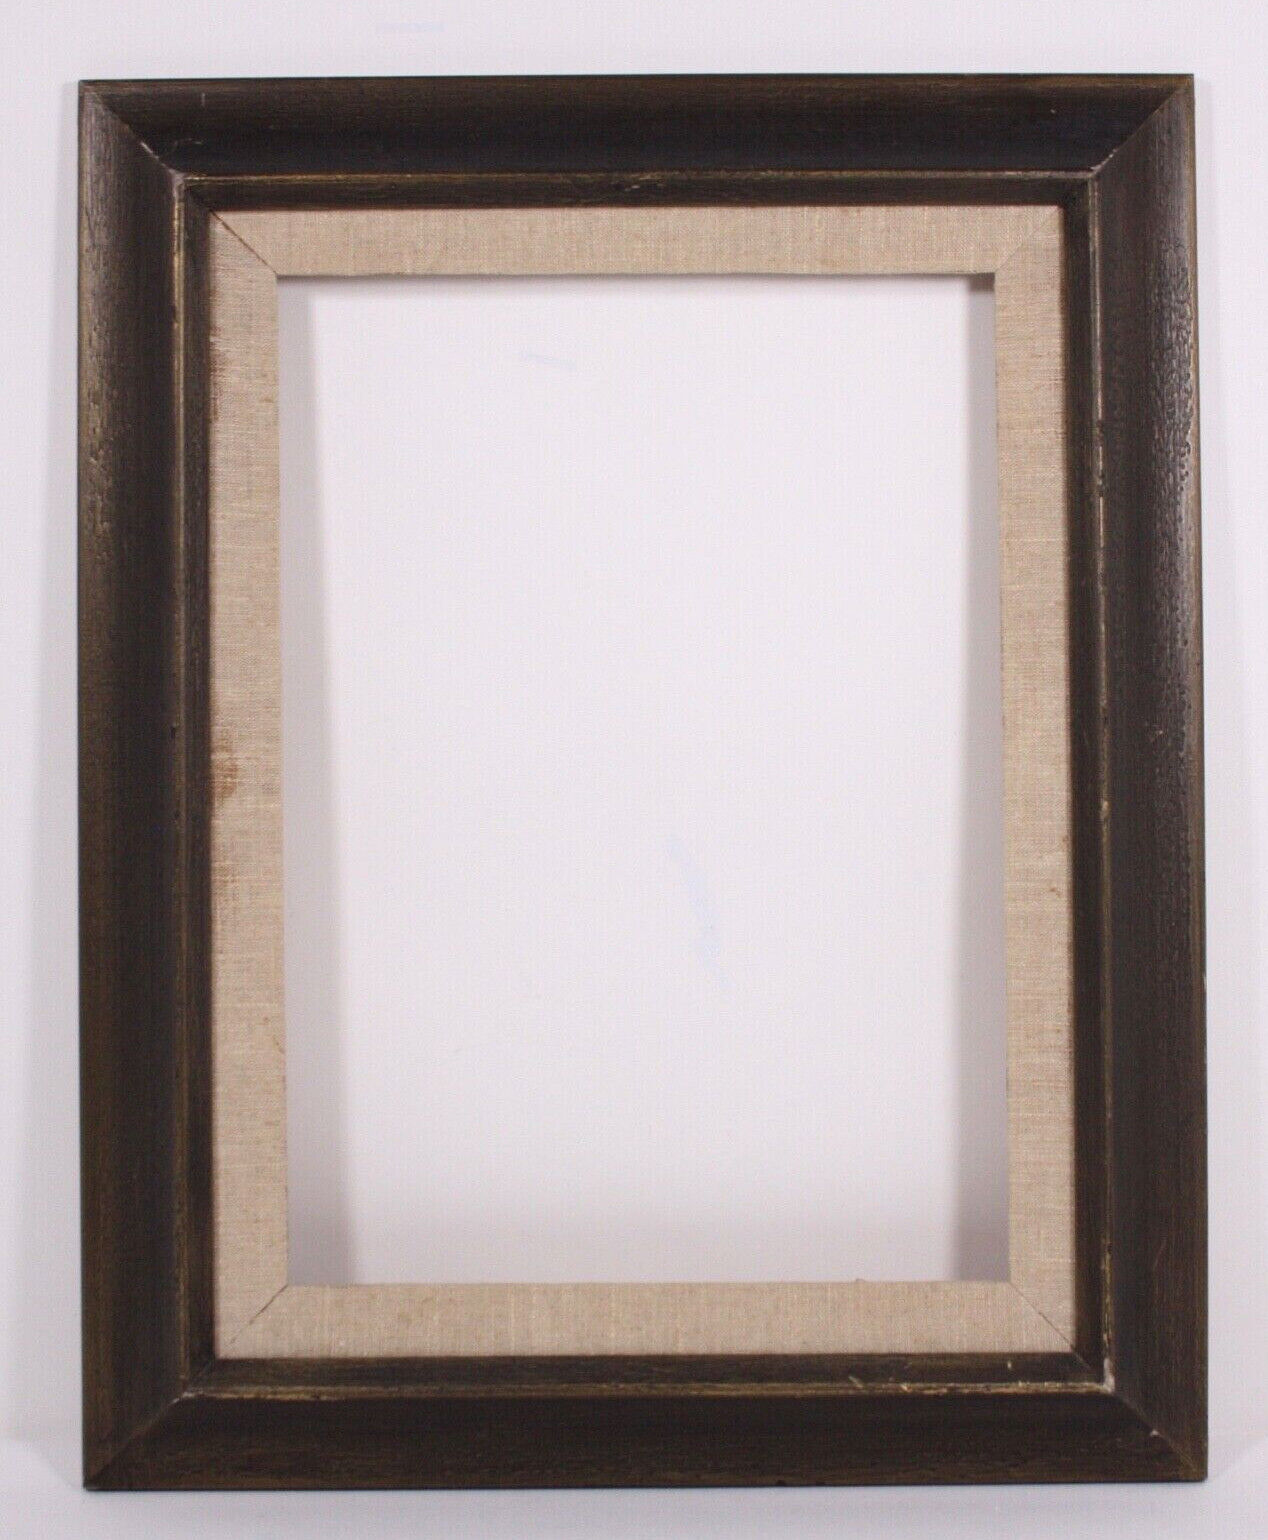 Mid C Mod Vtg 25x20 Metallic Brown Paint Wood Frame for 18x13 or 20.5x15.5 Art 